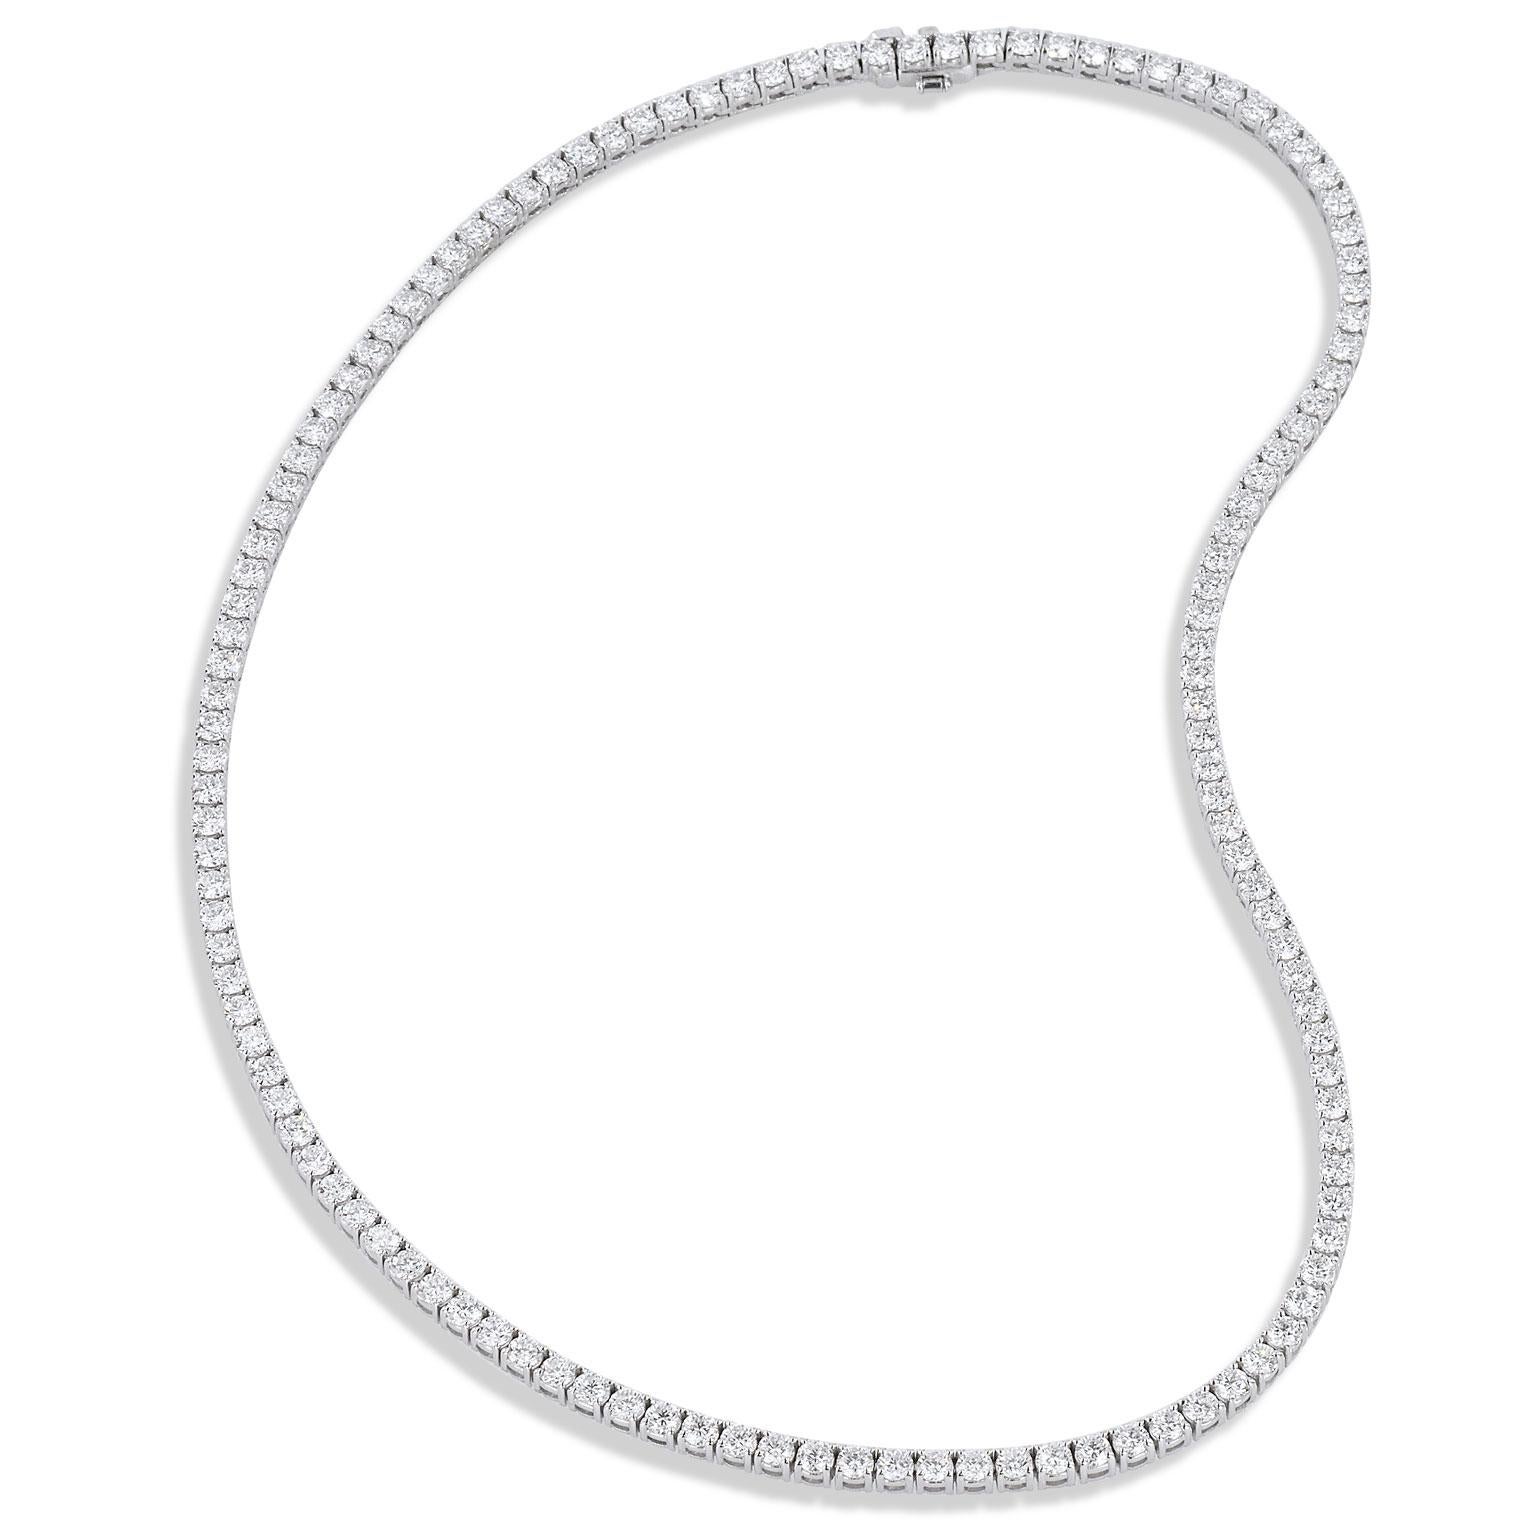 Diamond Riviera Necklace 18 Inches Long 8.93 Total Carat Handmade of 18 karats white gold.

This sparkling round brilliant cut diamond Riviera necklace measures 18 inches long. 
It is comprised of 165 round brilliant cut diamonds with the color F/G